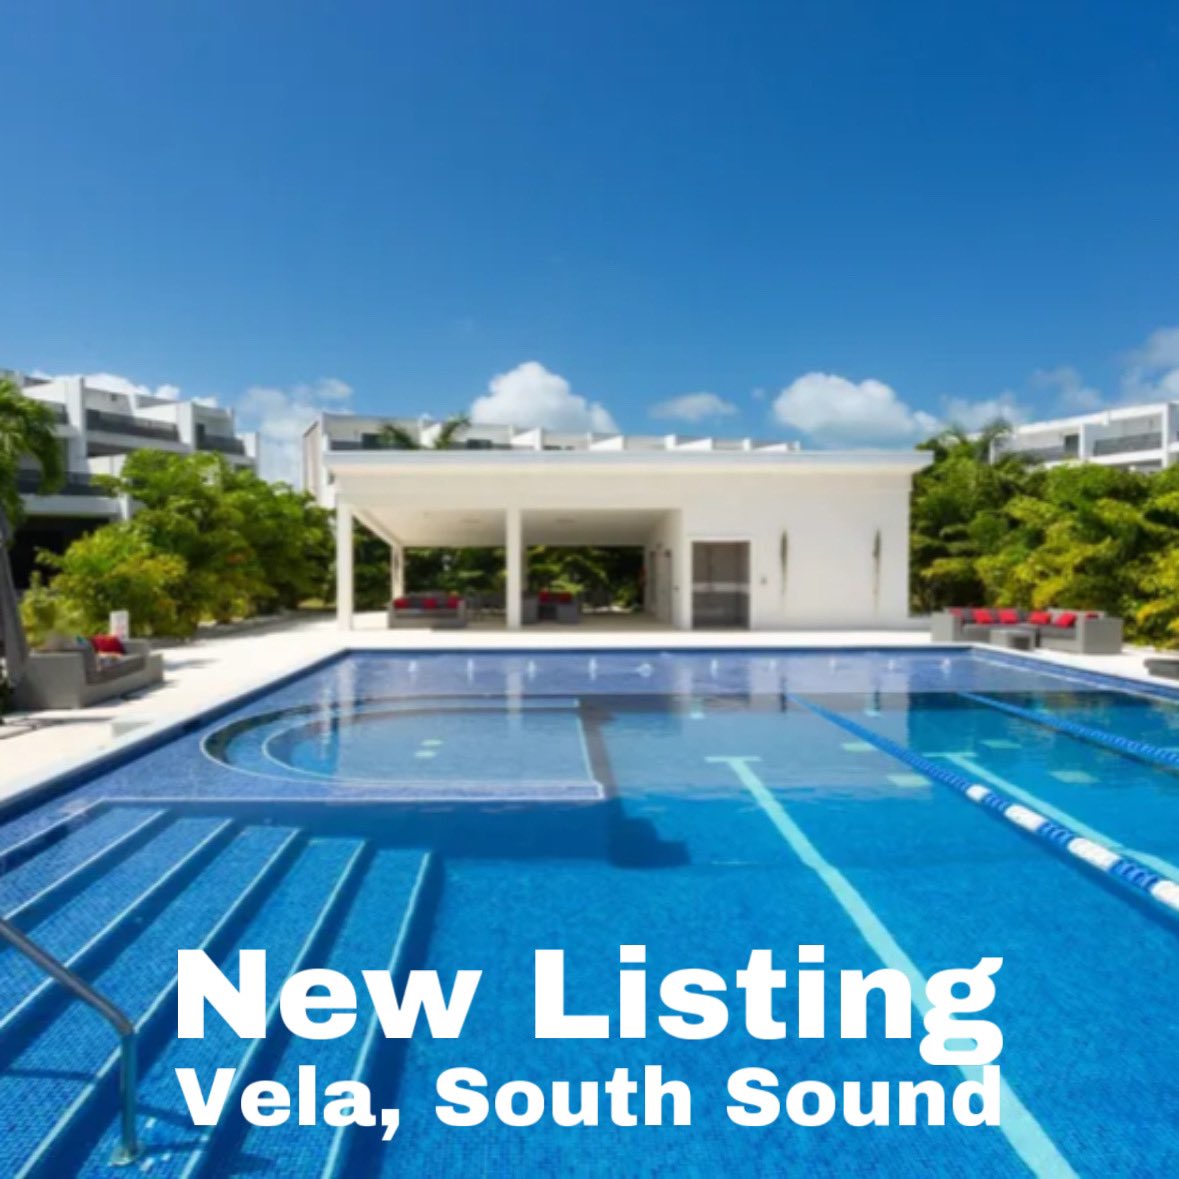 New Listing
Vela

3 pools, 2 fitness centres, 2 tennis courts &children’s play area. A true community where families can enjoy life

Member of CIREBA
MLS # 417501

#NewListing #OlympicSizedPools #TennisCourts #Scuba
#CaymanRealEstate #caymansothebysrealty #caymanislandsrealestate